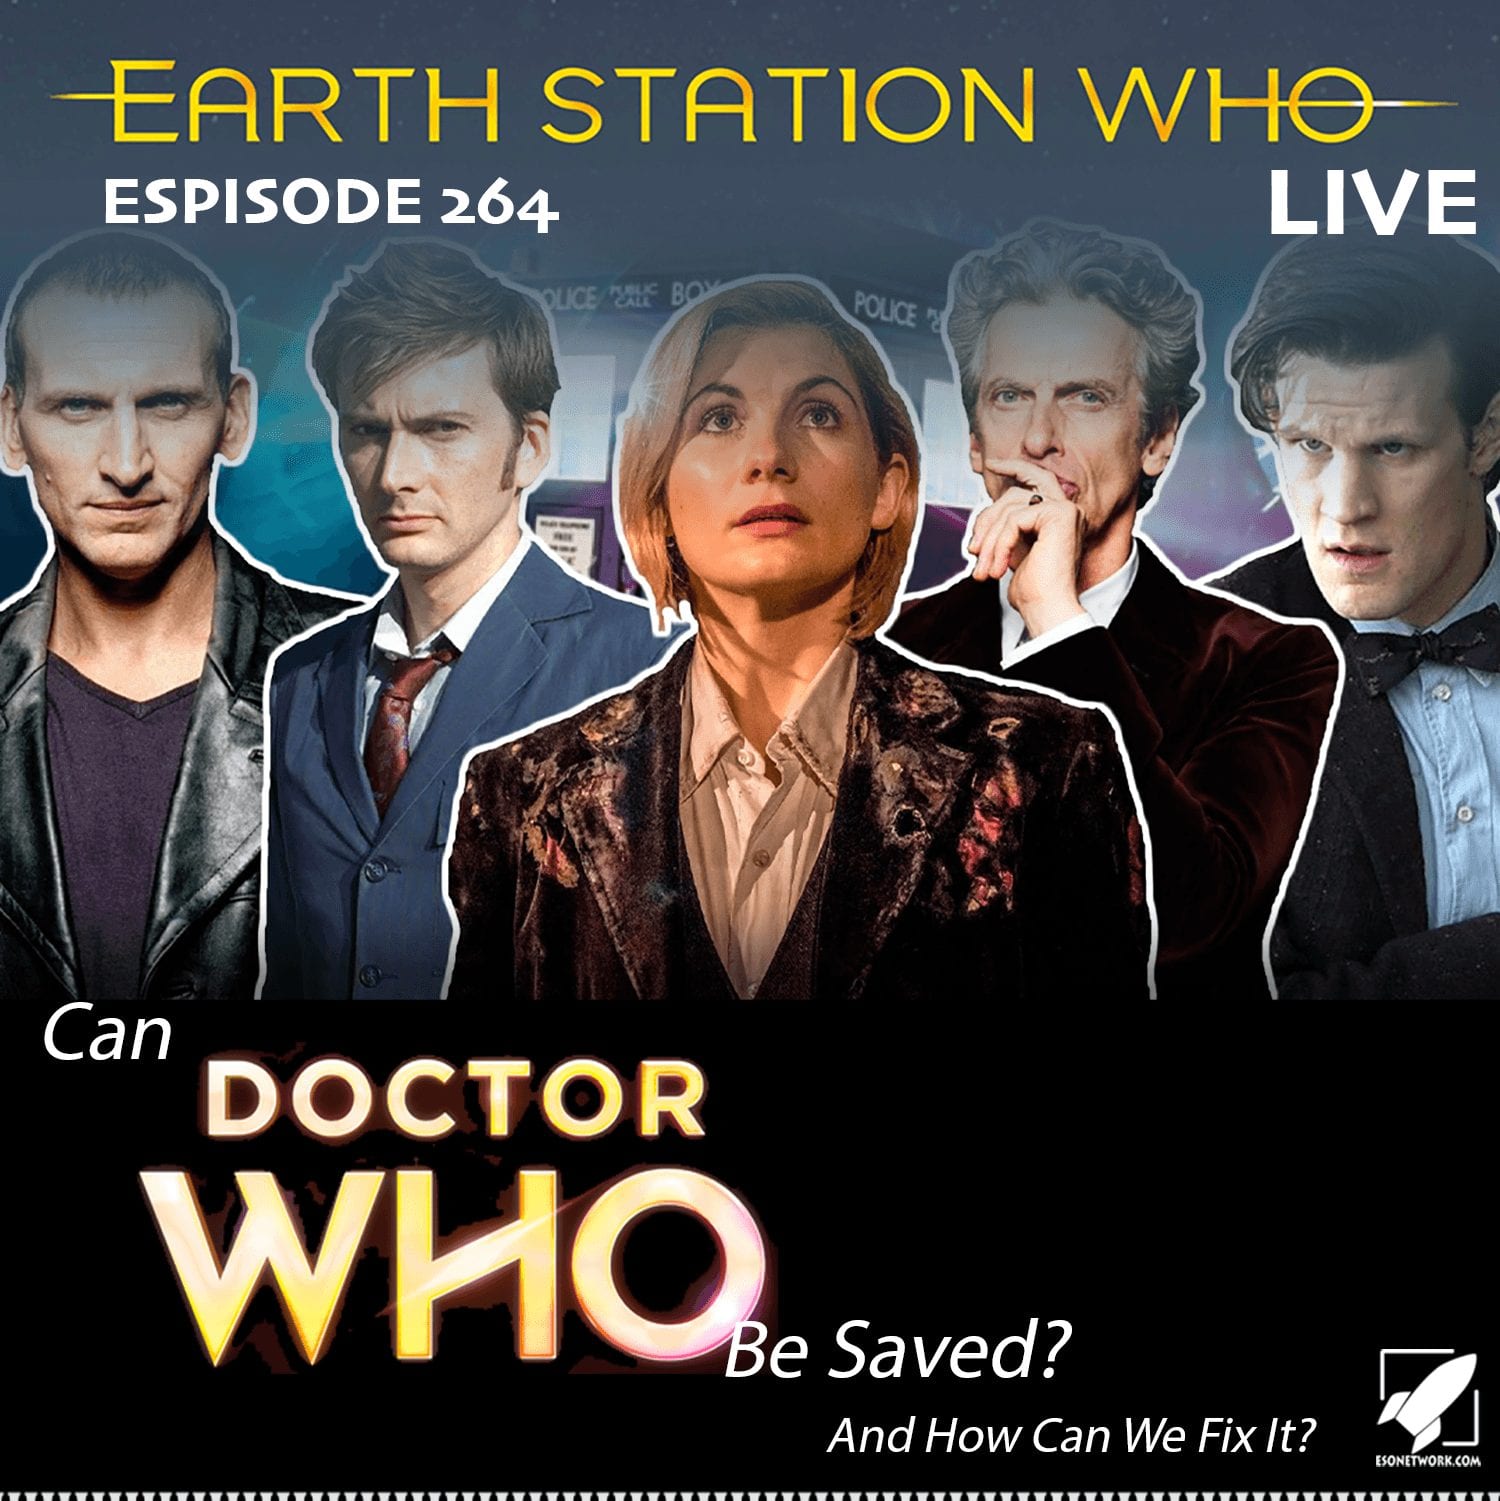 Earth Station Who Ep 264